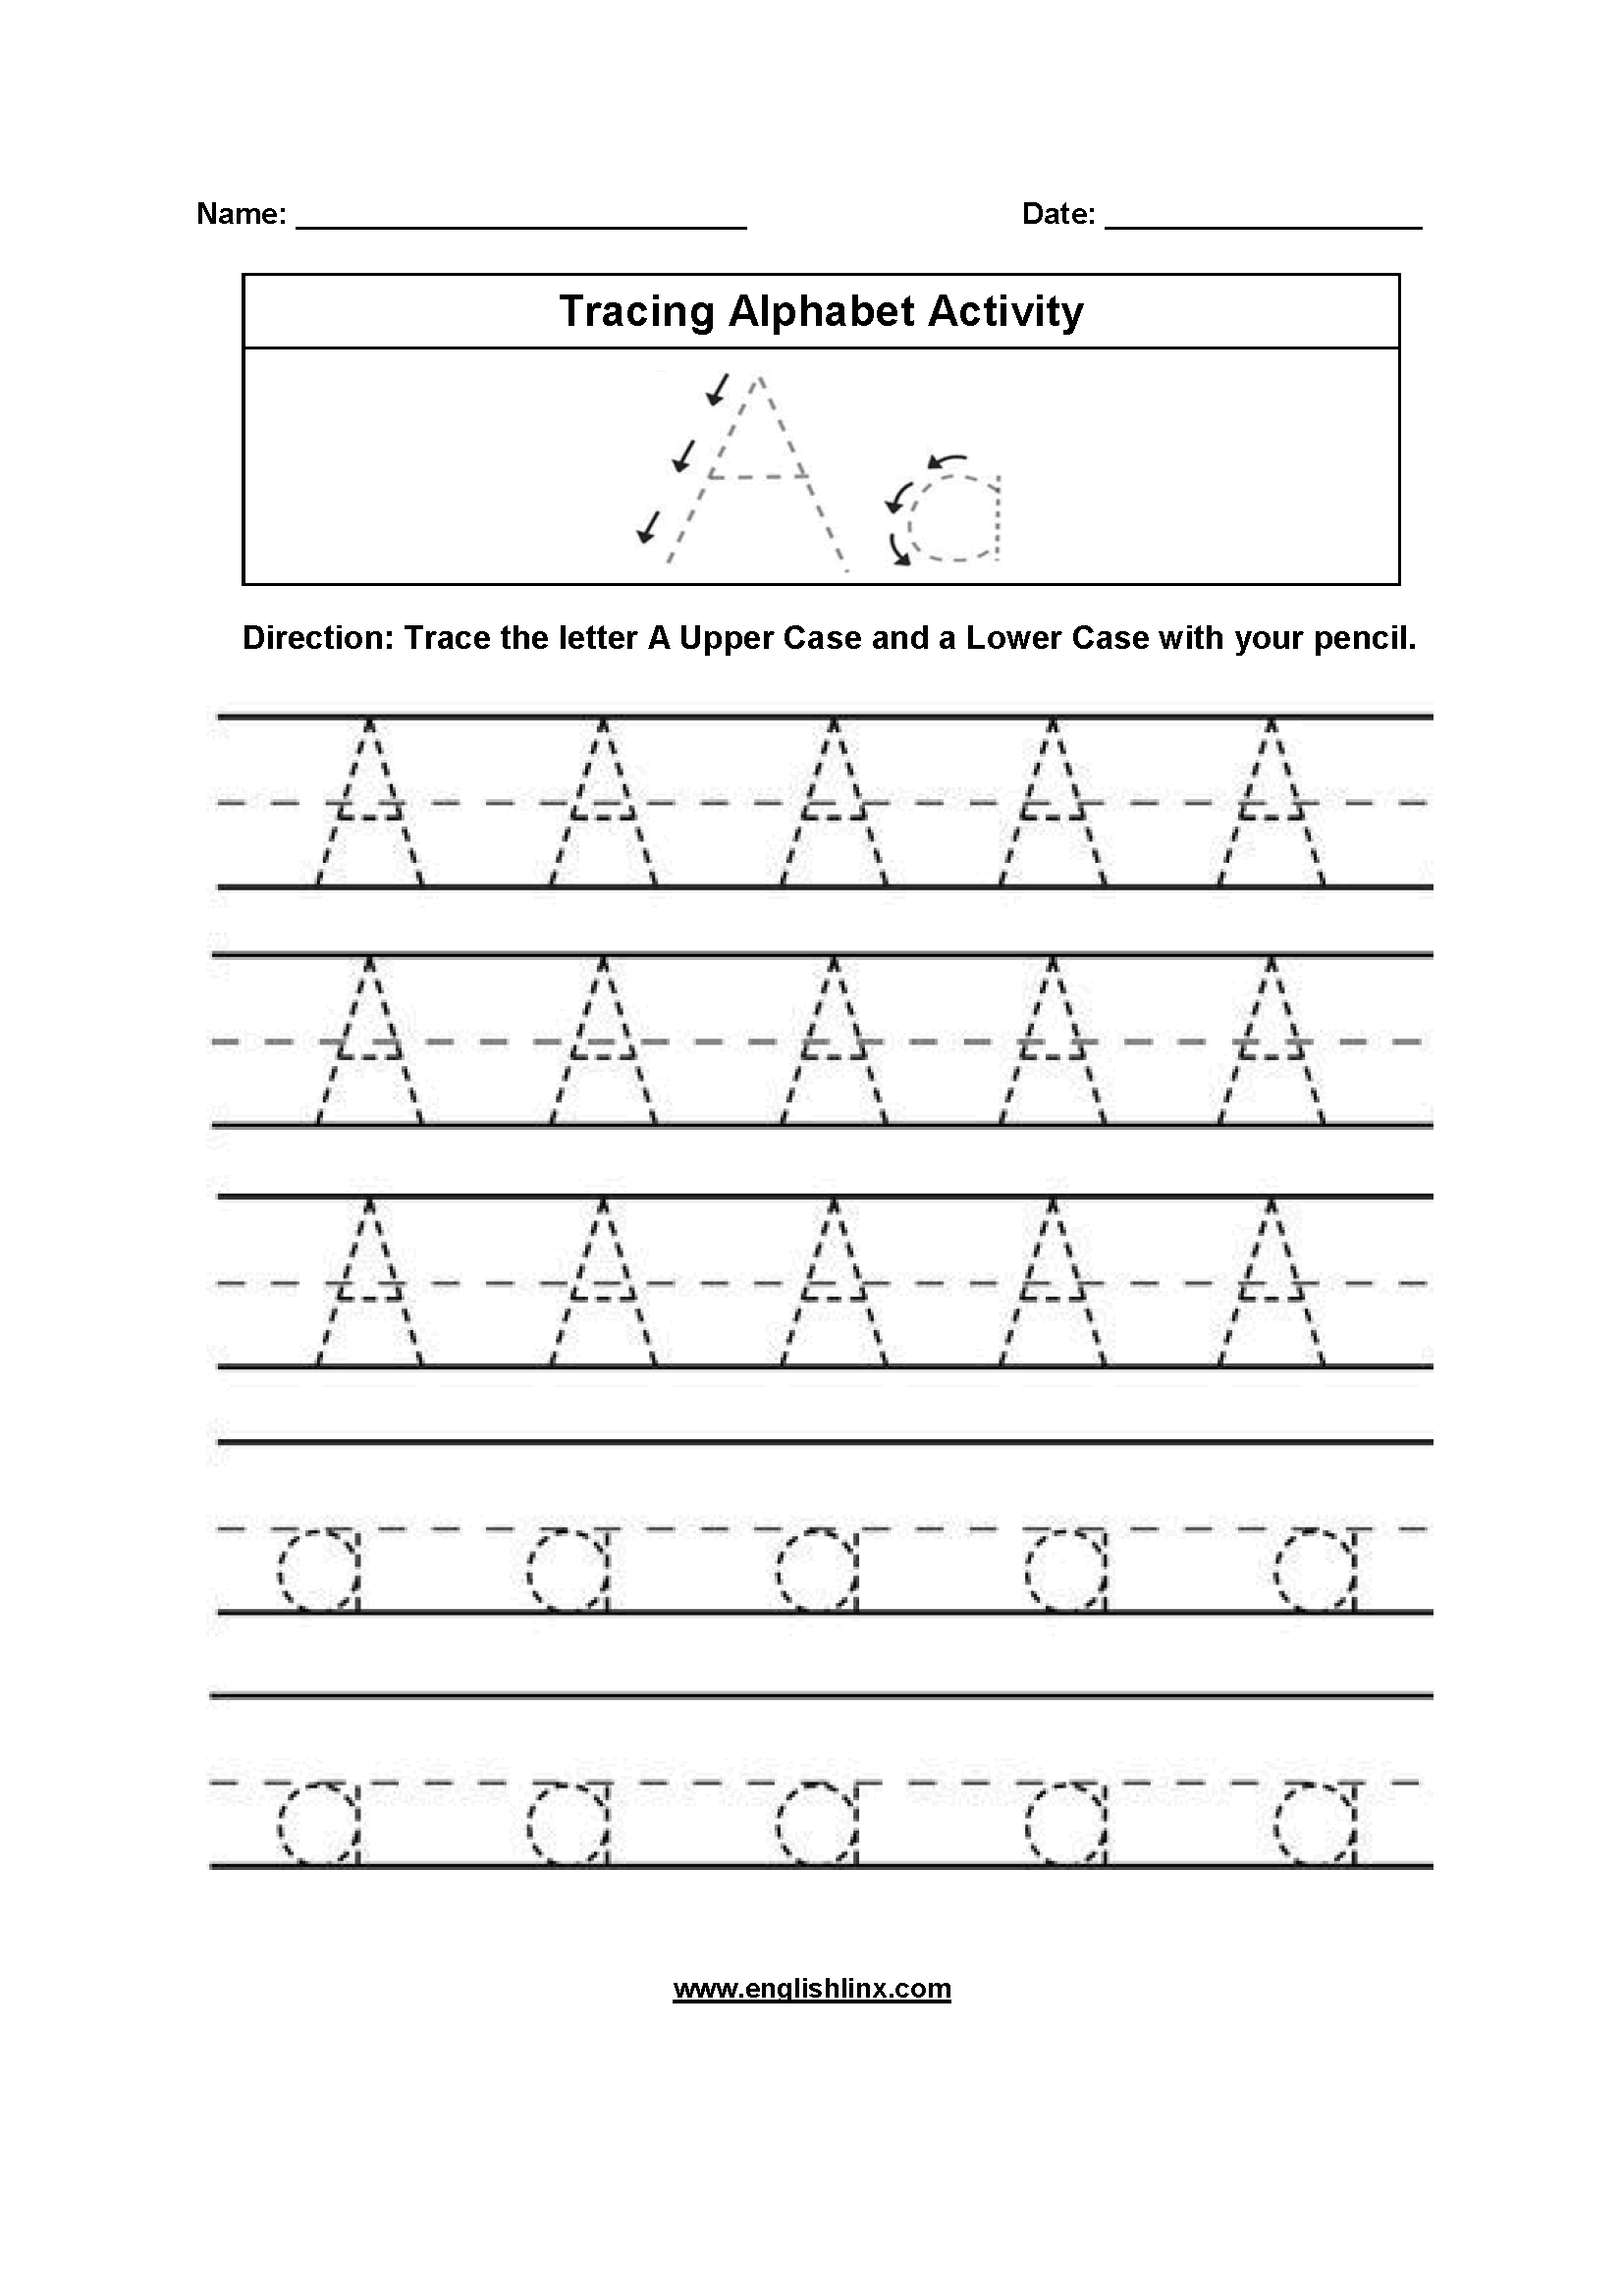 Free Tracing Letters Worksheet | Printable Worksheets And with regard to Trace Letter A Worksheets Free